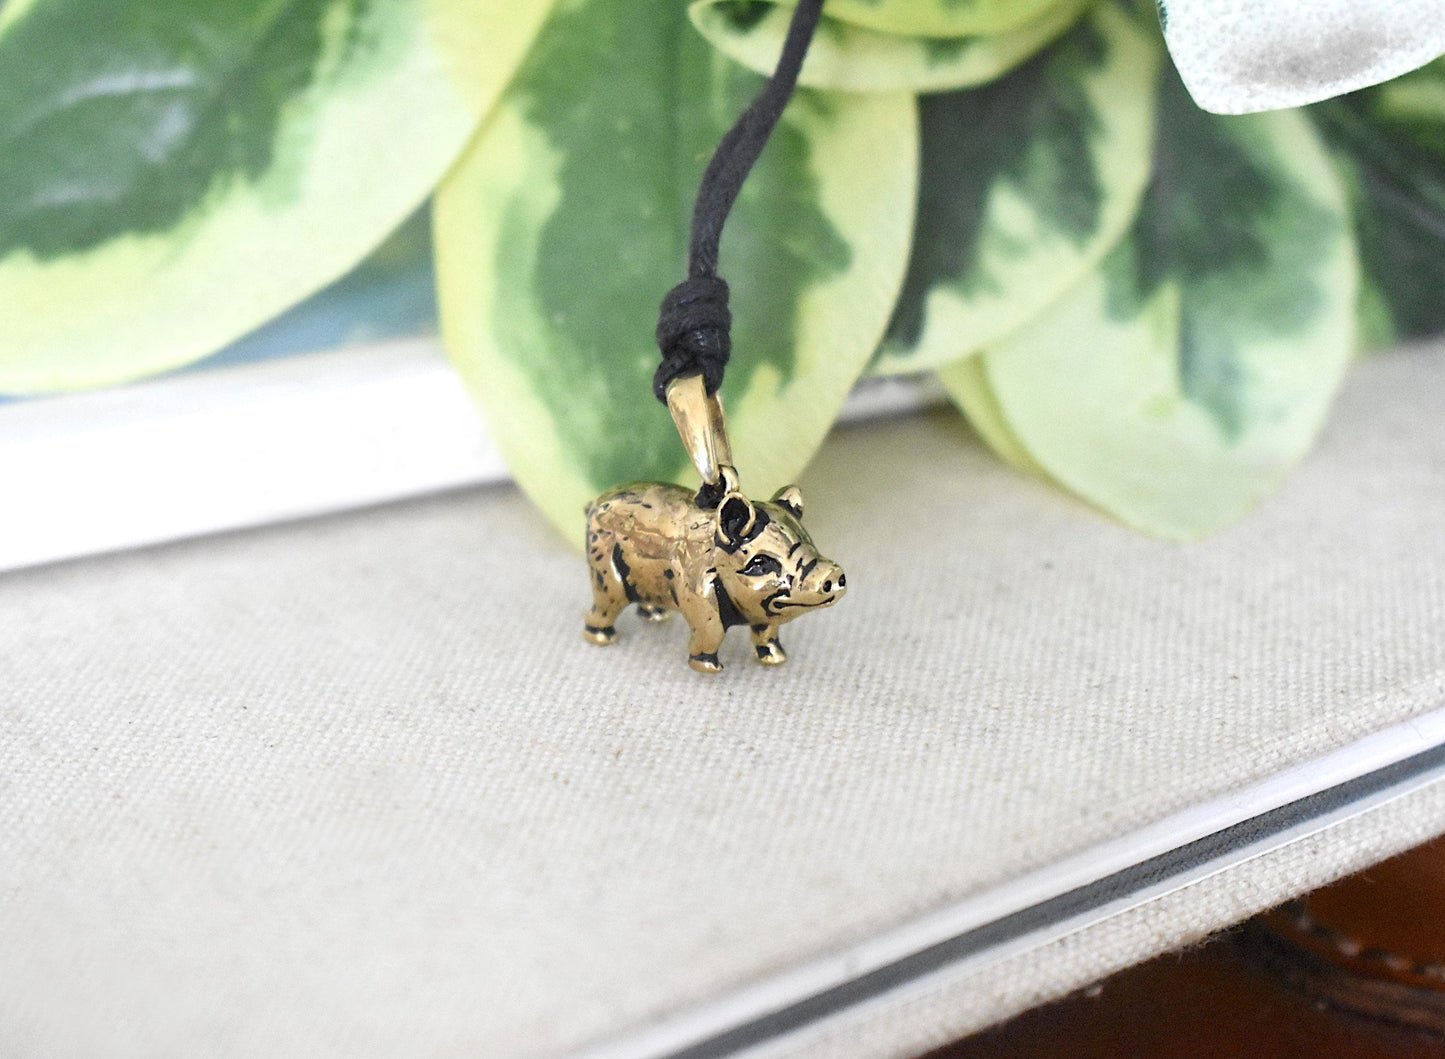 Smiling Pig Gold Brass Charm Necklace Pendant Jewelry